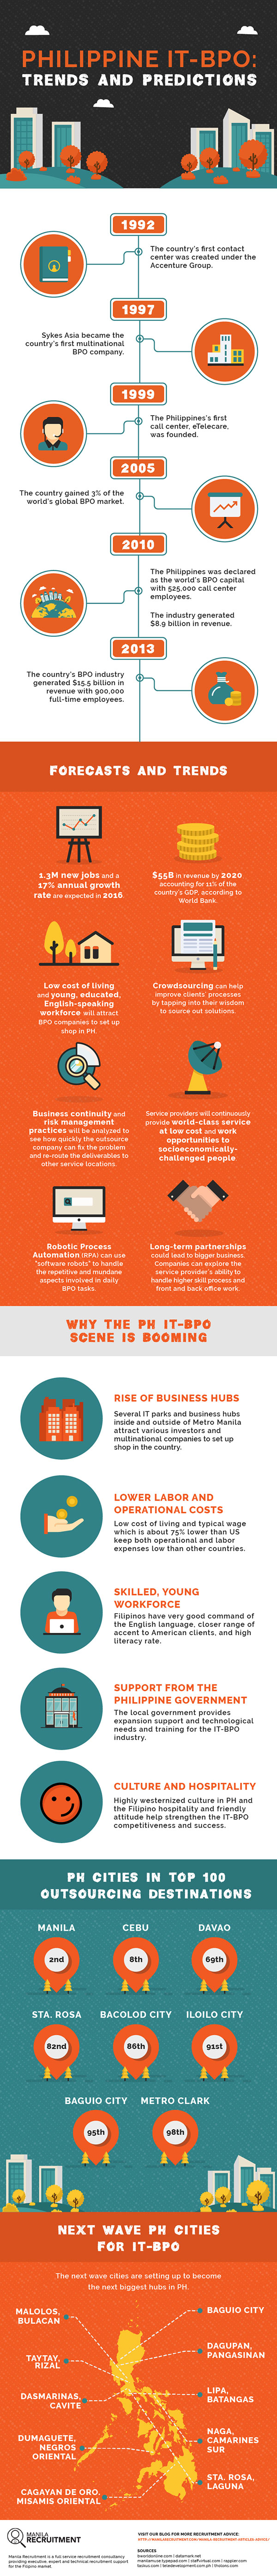 Trends and predictions for the Philippine IT-BPO industry